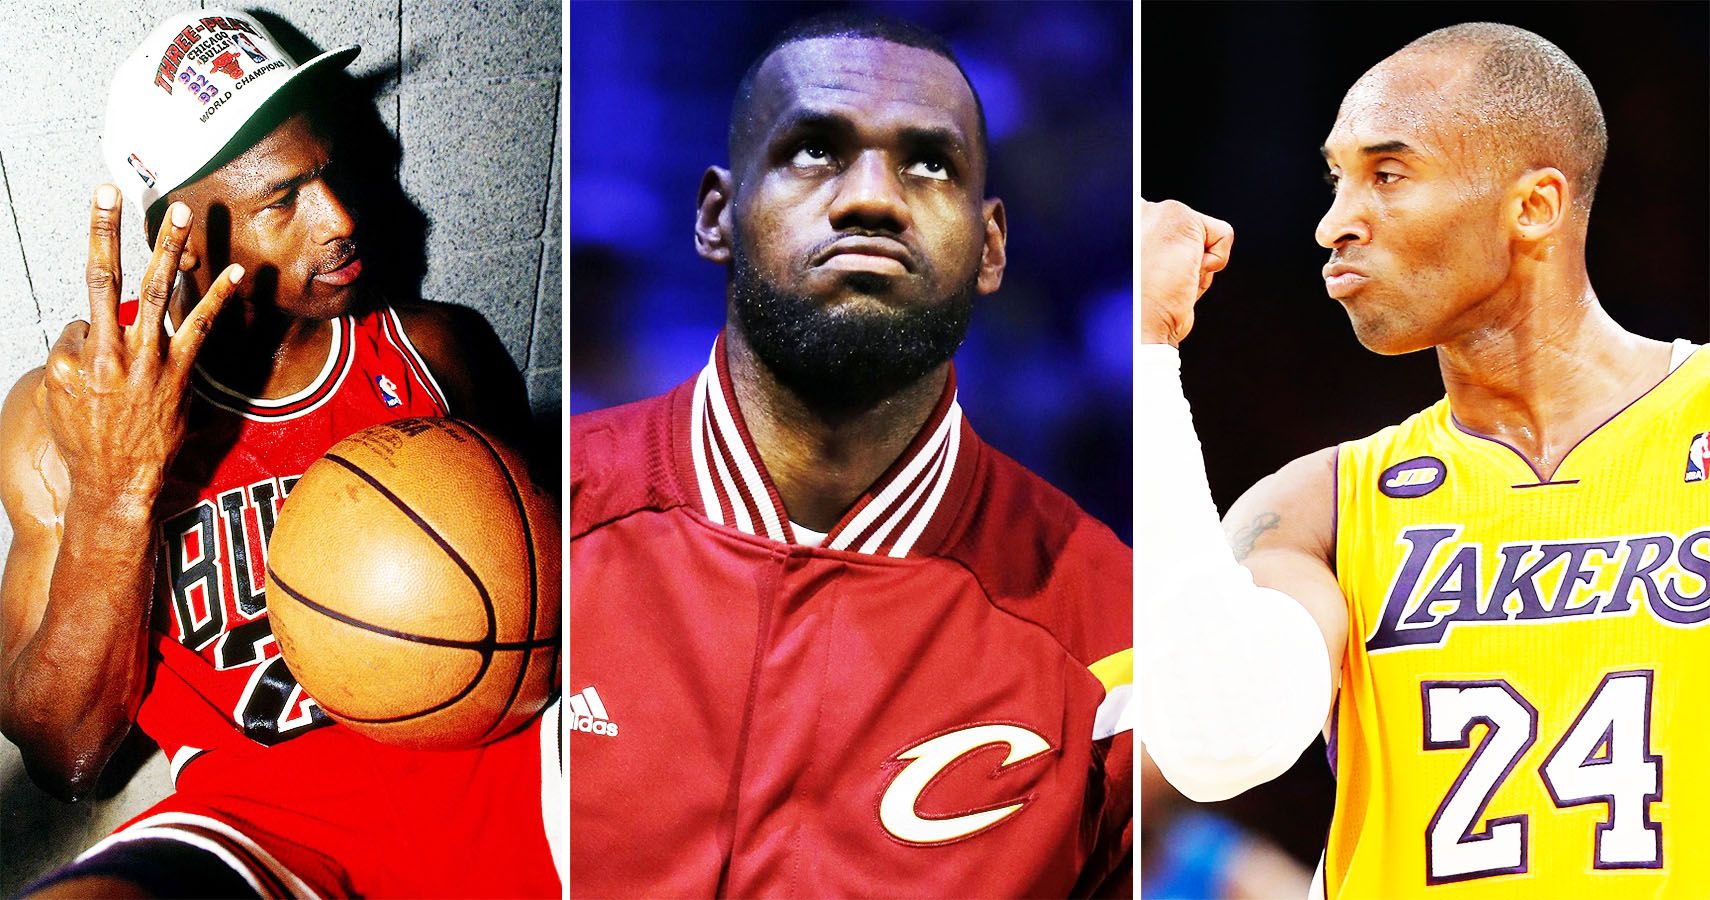 Top 15 All-Time NBA Players That Are Better Than LeBron James